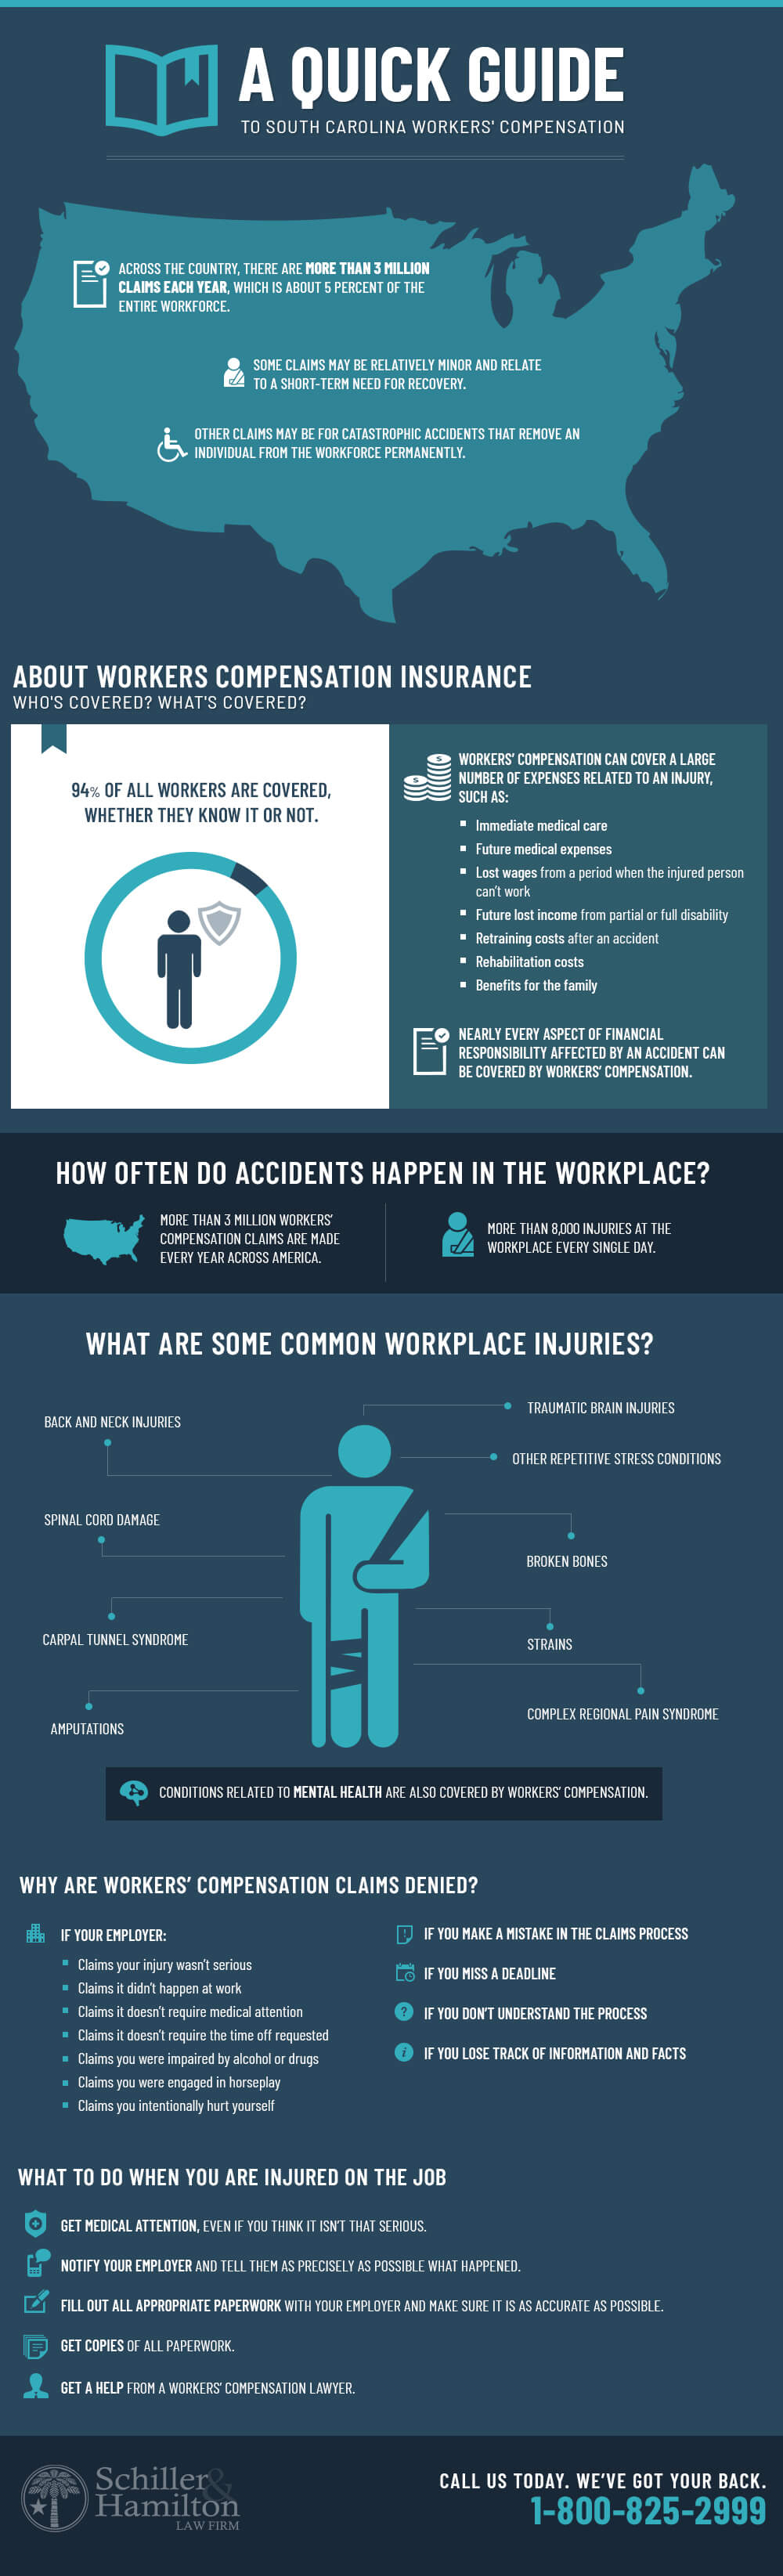 Reasons Why Workers Compensation Claims Denied